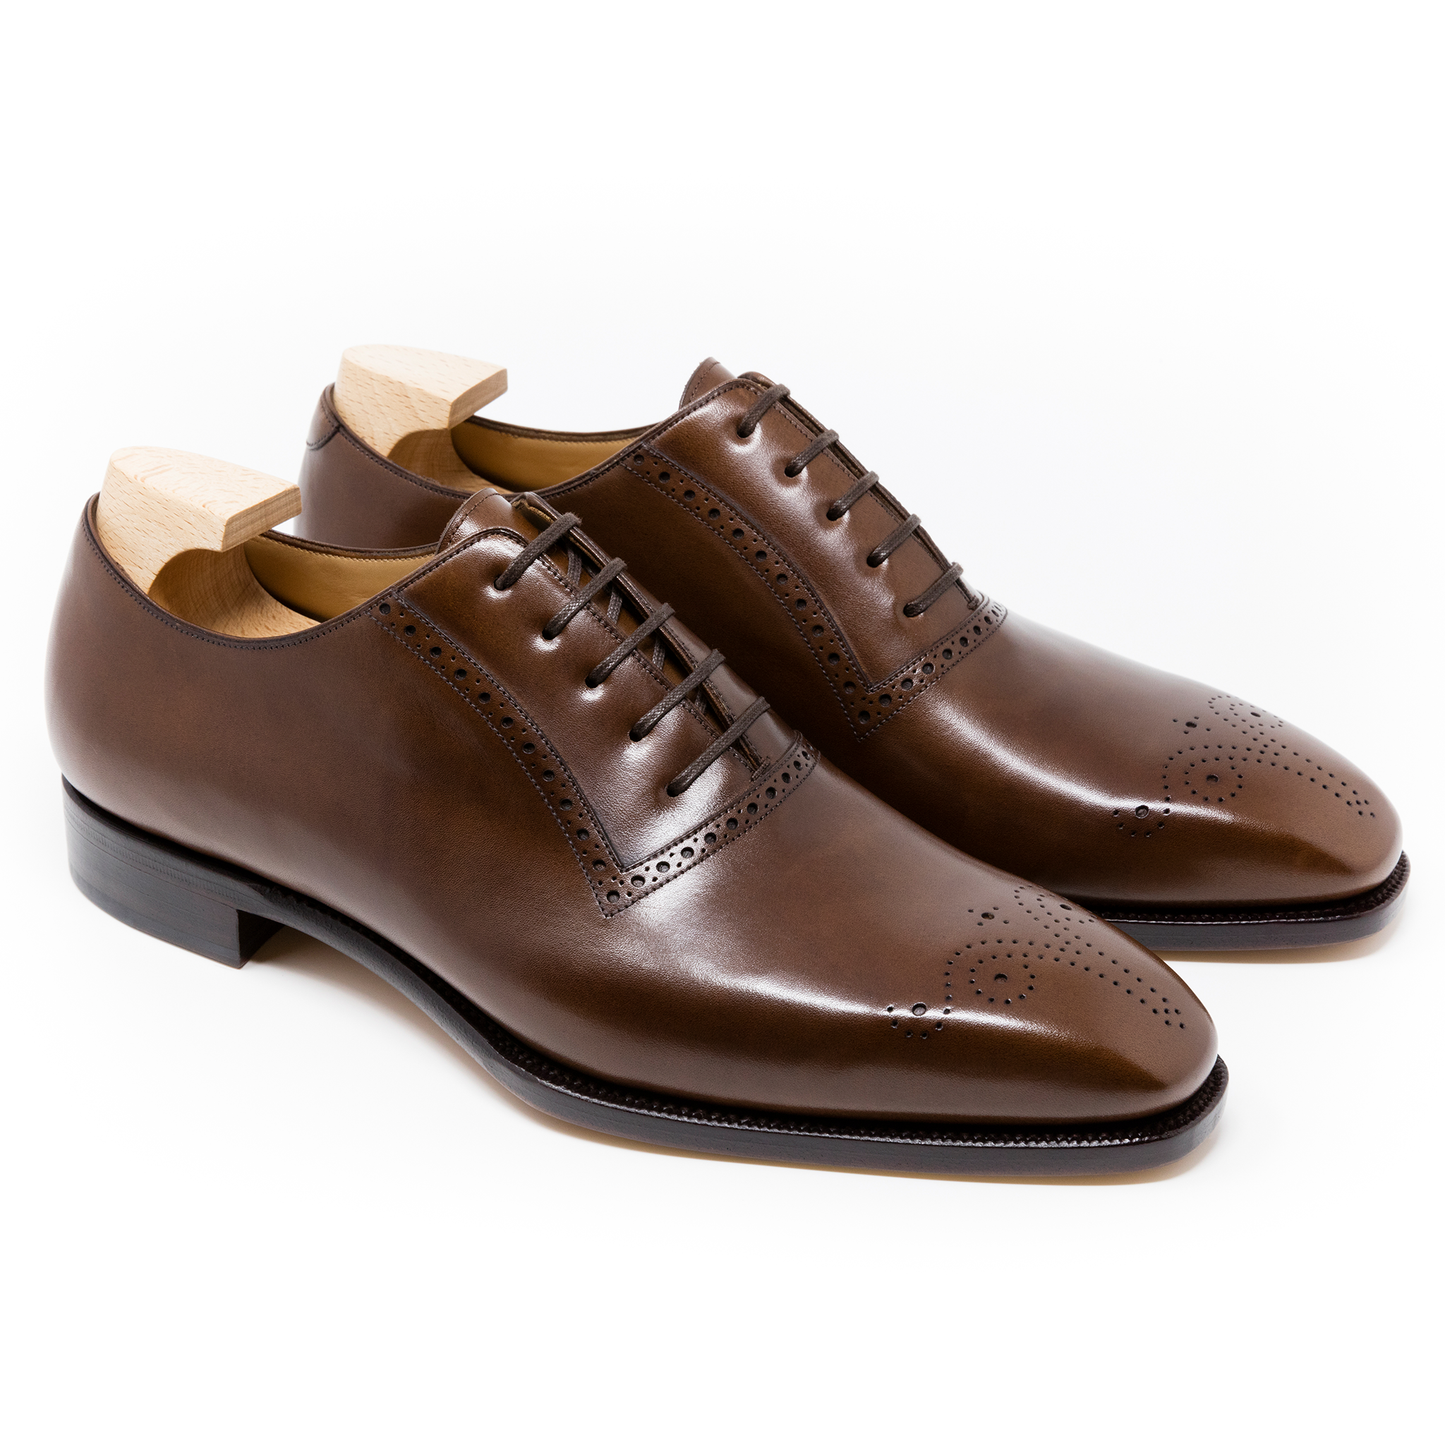 TLB Mallorca leather shoes 107 / PICASSO /VEGANO BROWN